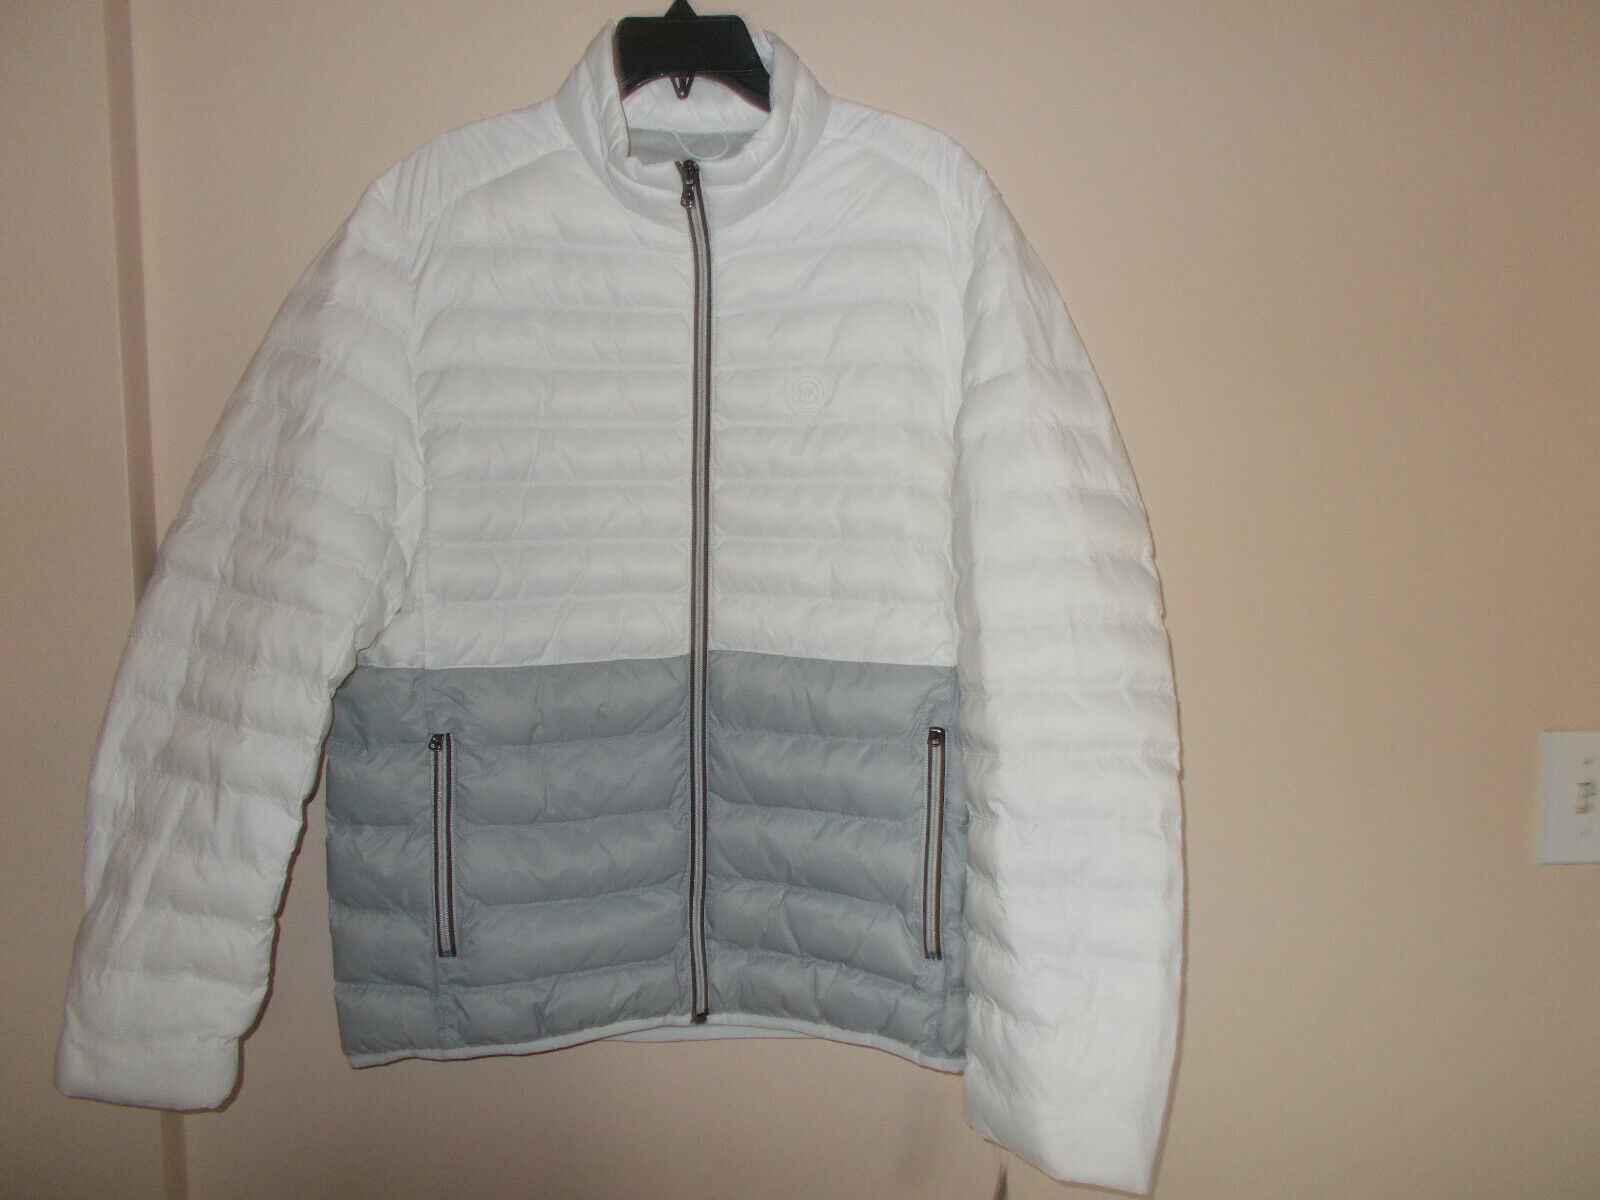 $225 Michael Kors Mens Two Tone Quilted Puffer Jacket White Gray sz L NWT  883661986032 | eBay